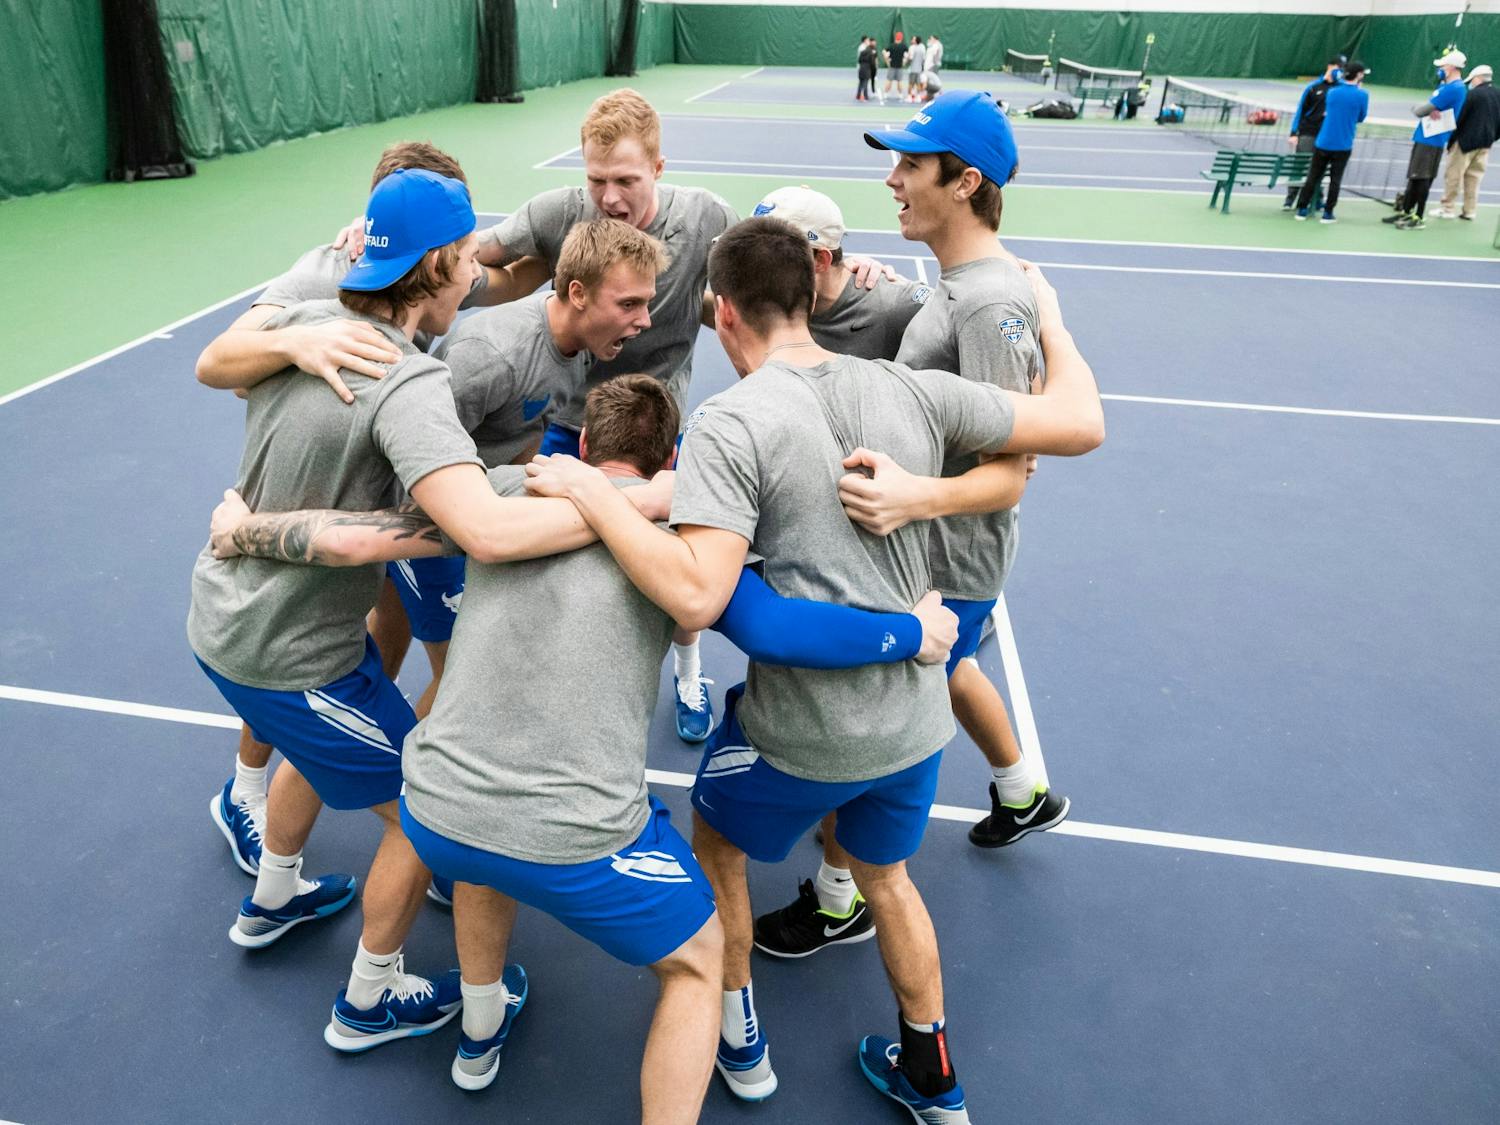 Since head coach Lee Nickell took over the program in 2009, the UB men's tennis team has utilized international recruiting to build a competitive team.